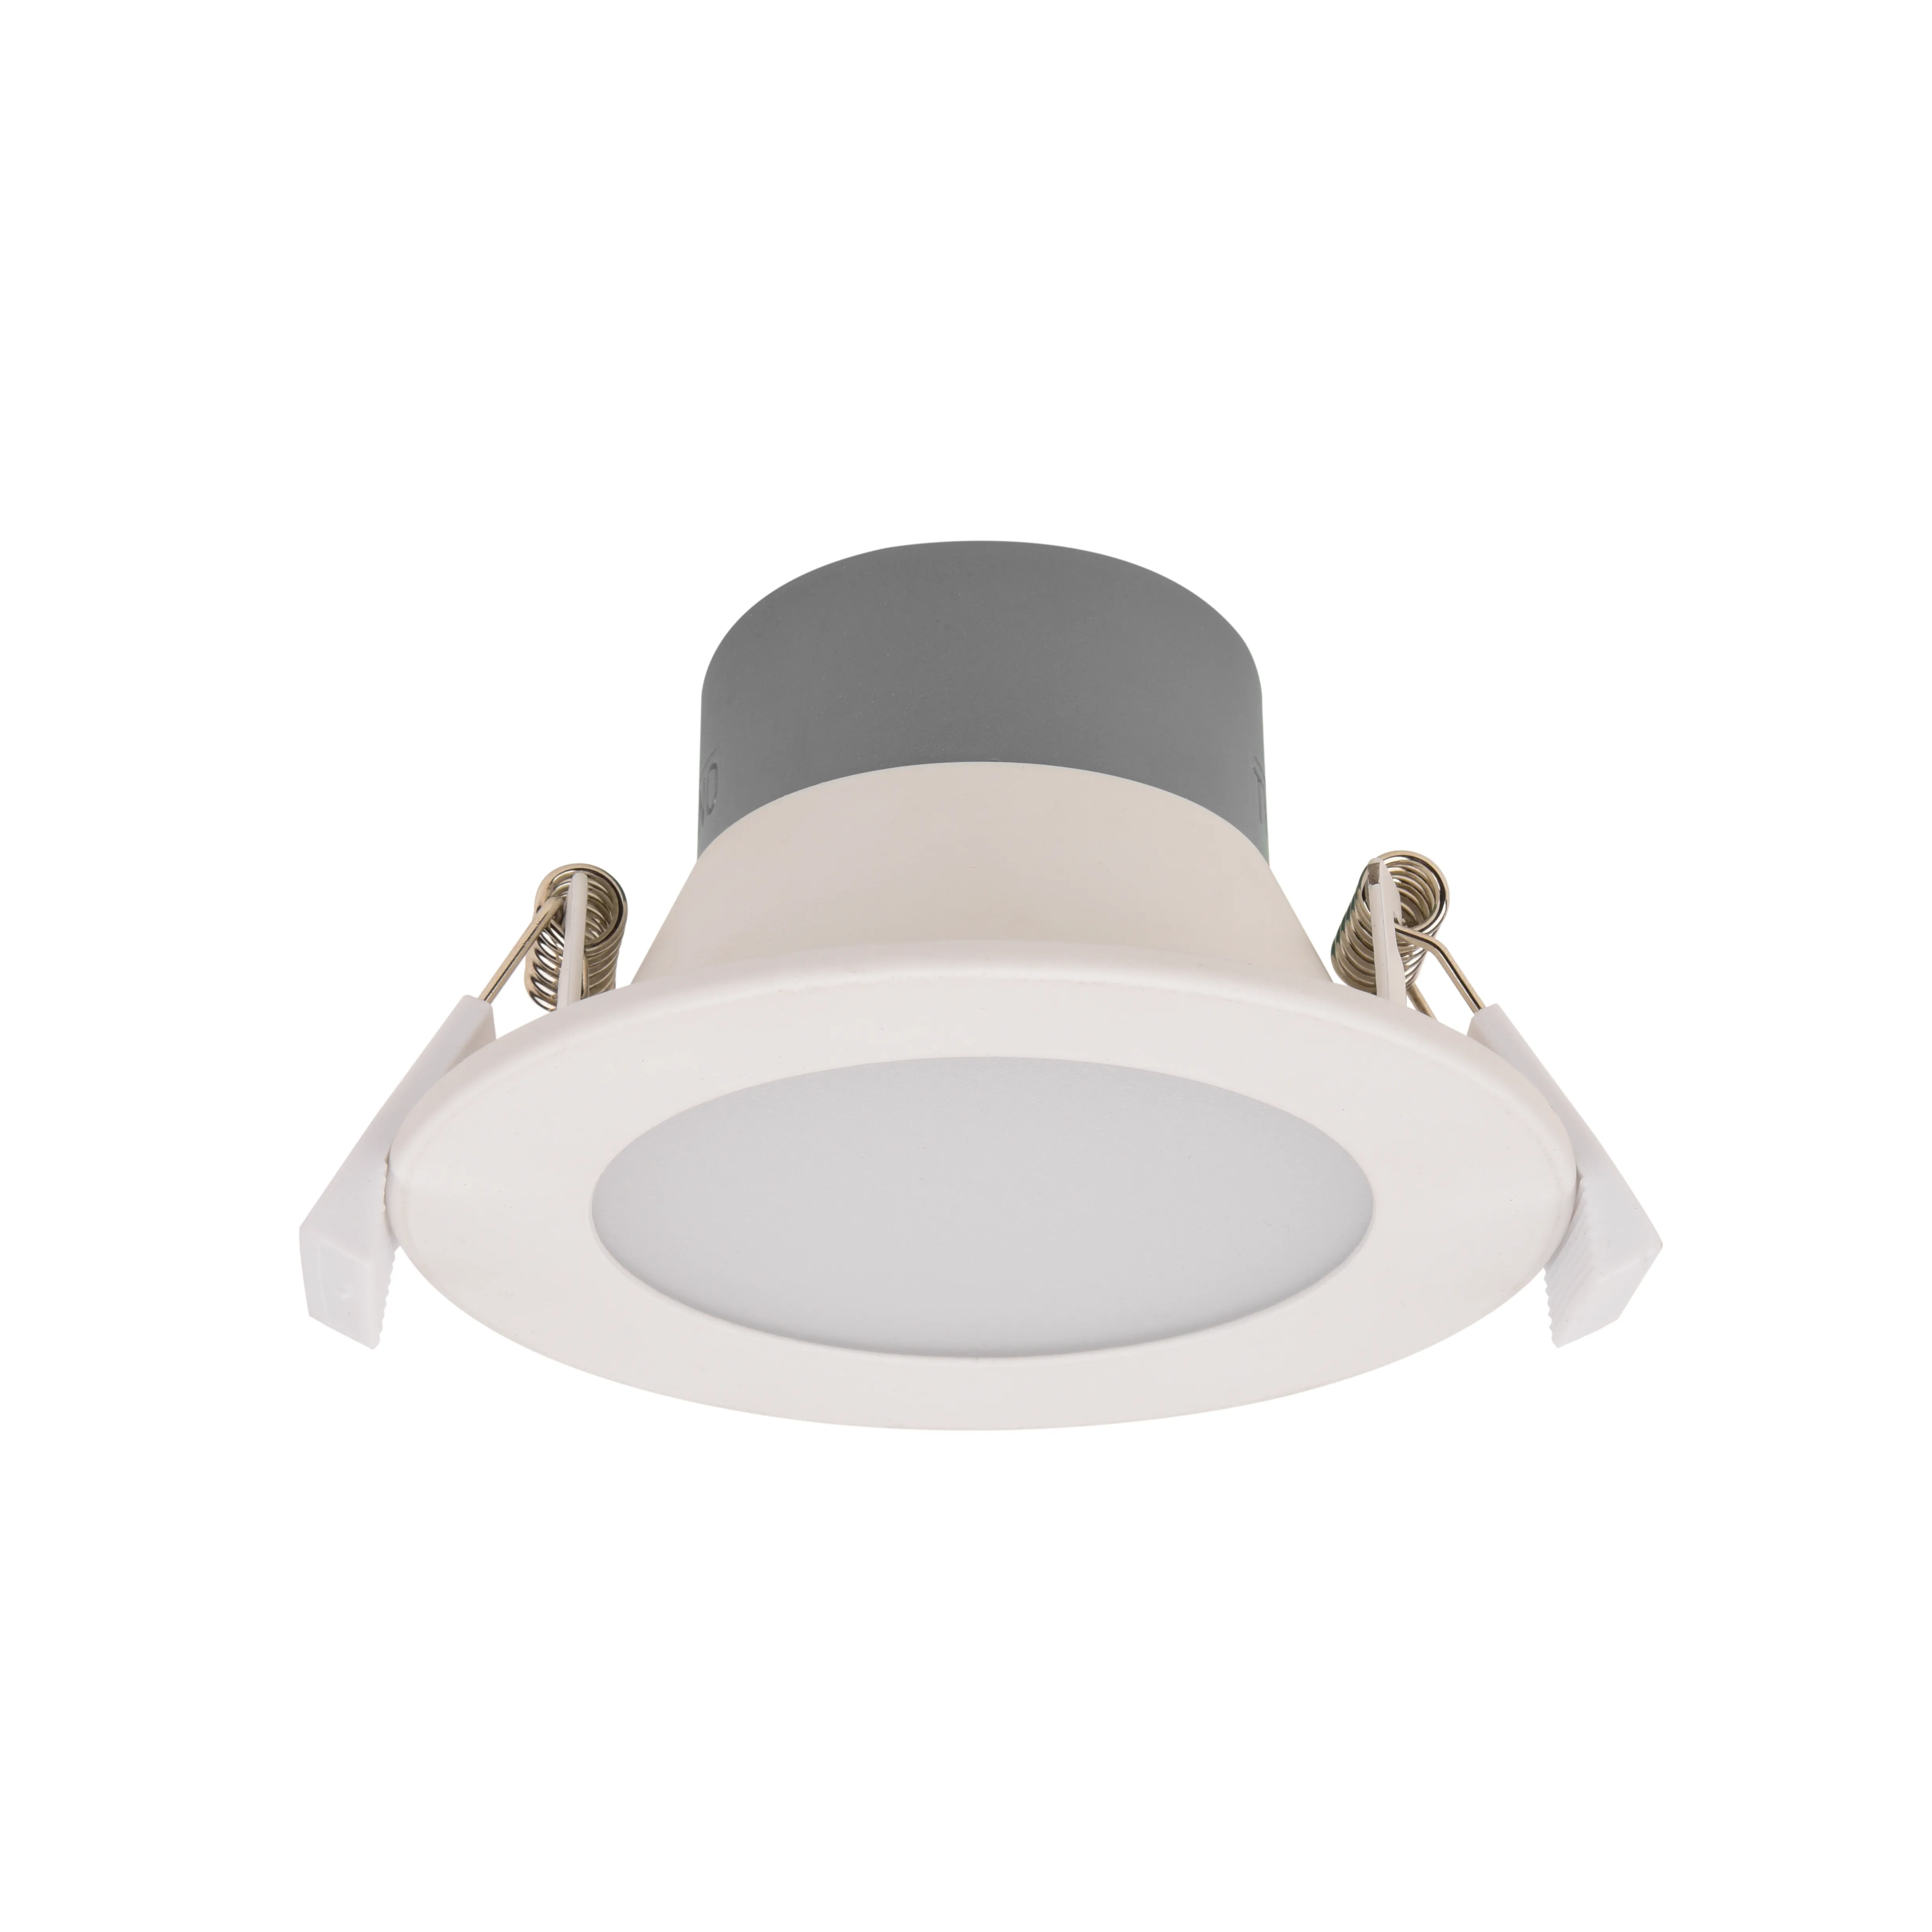 IP65 Led Ceiling Down Light Fire-rated Downlight 8W Tri Color CCT Recessed Ceiling Light Dimmable Spotlight UGR<19